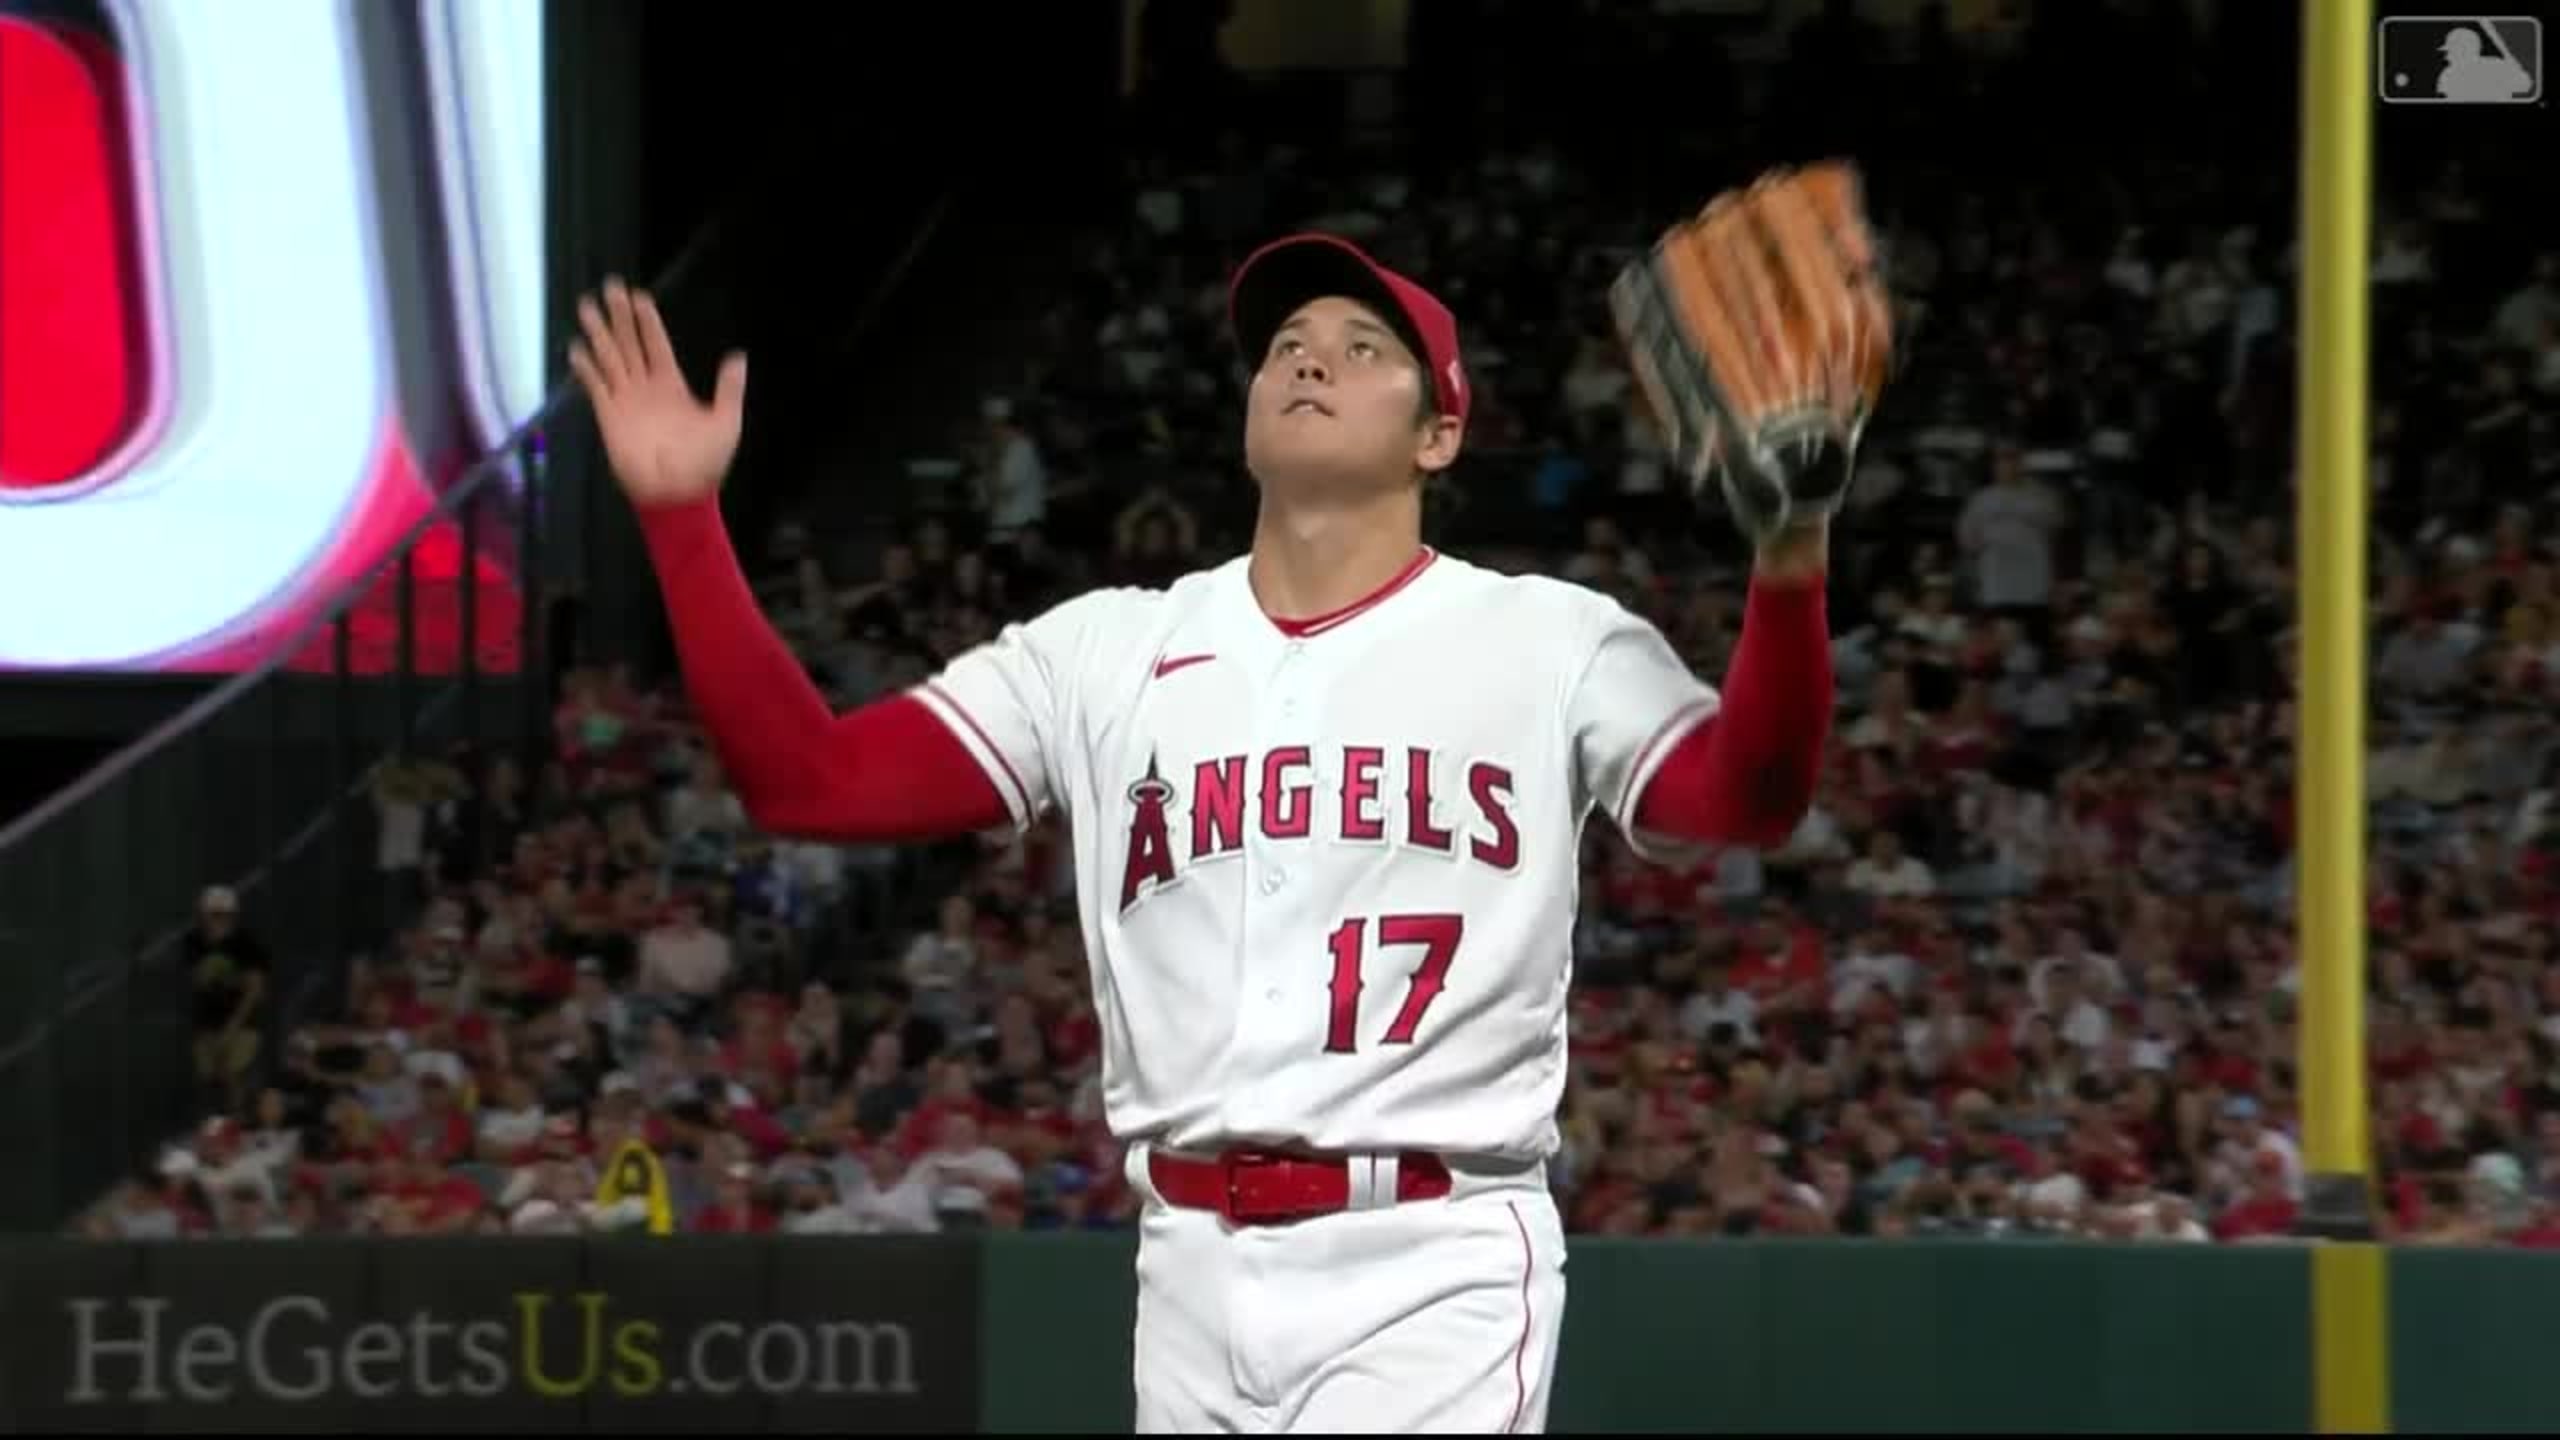 Why the advertising on the pitchers mound. Ew : r/angelsbaseball